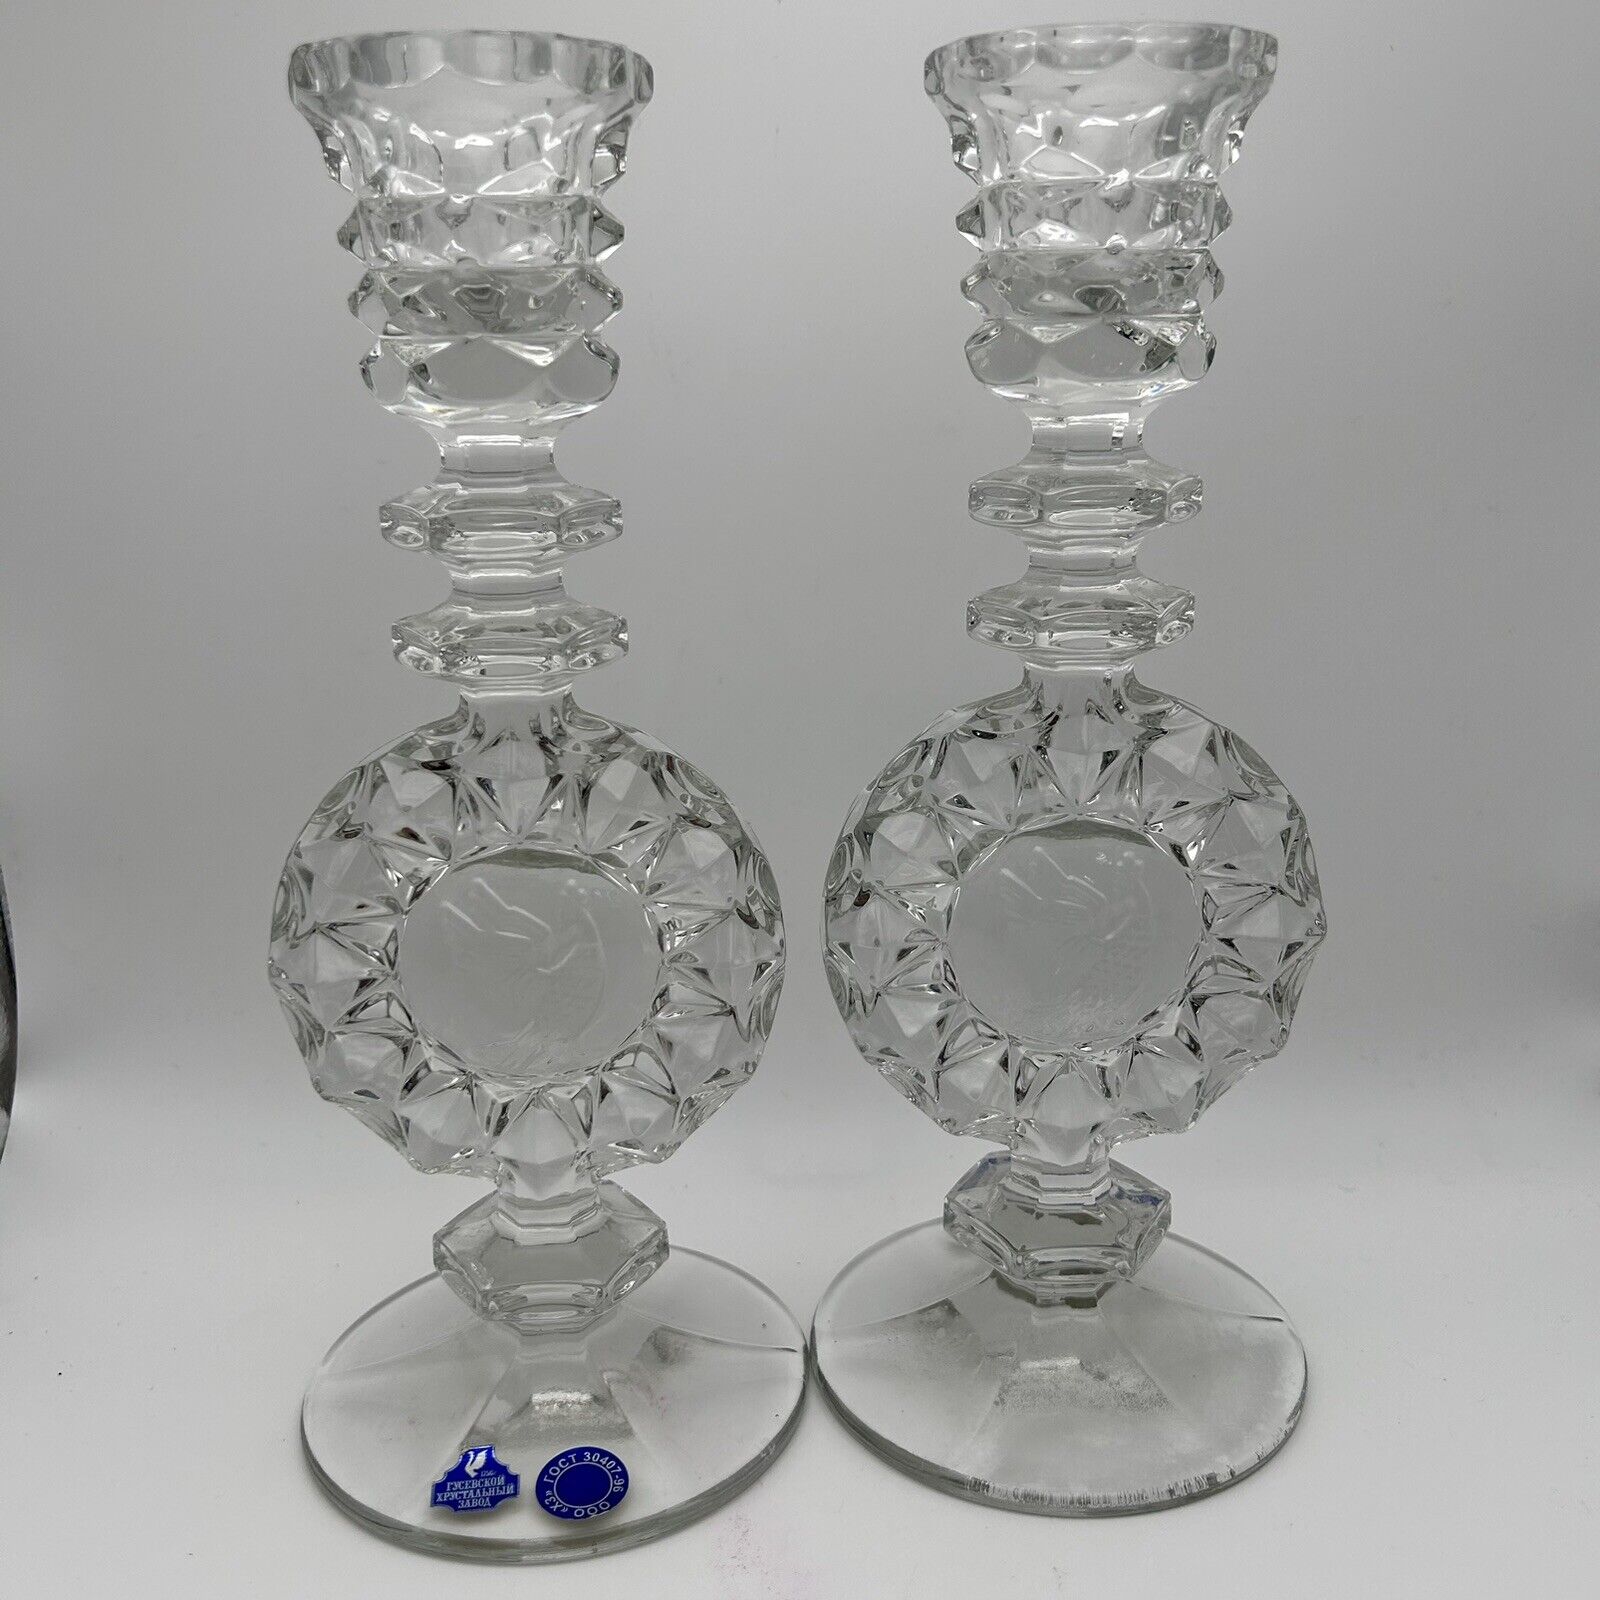 PAIR OF GOOSE TRANSPARENT CRYSTAL CANDLE HOLDER 9-1/2” TALL